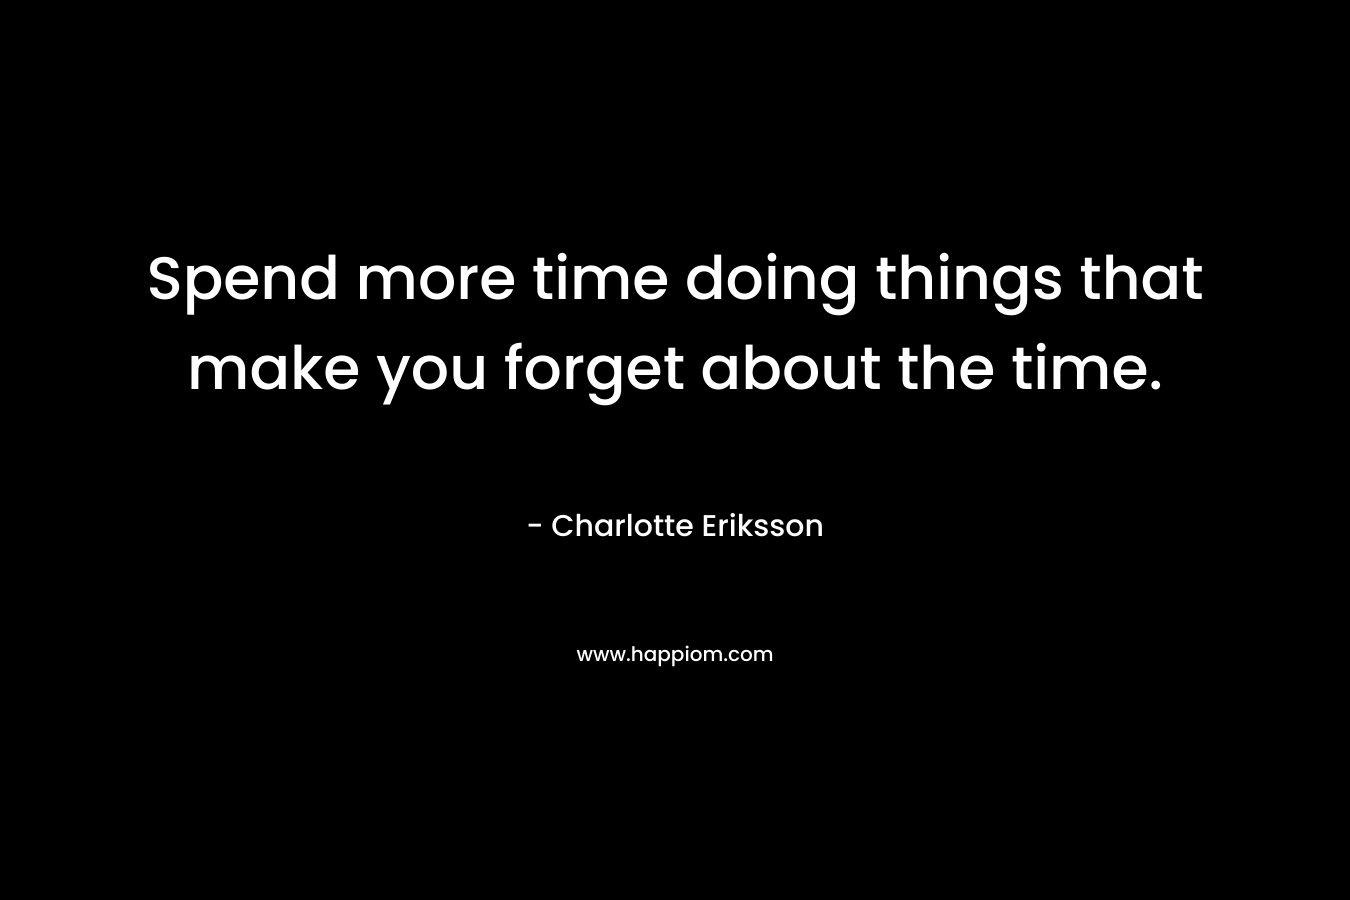 Spend more time doing things that make you forget about the time.